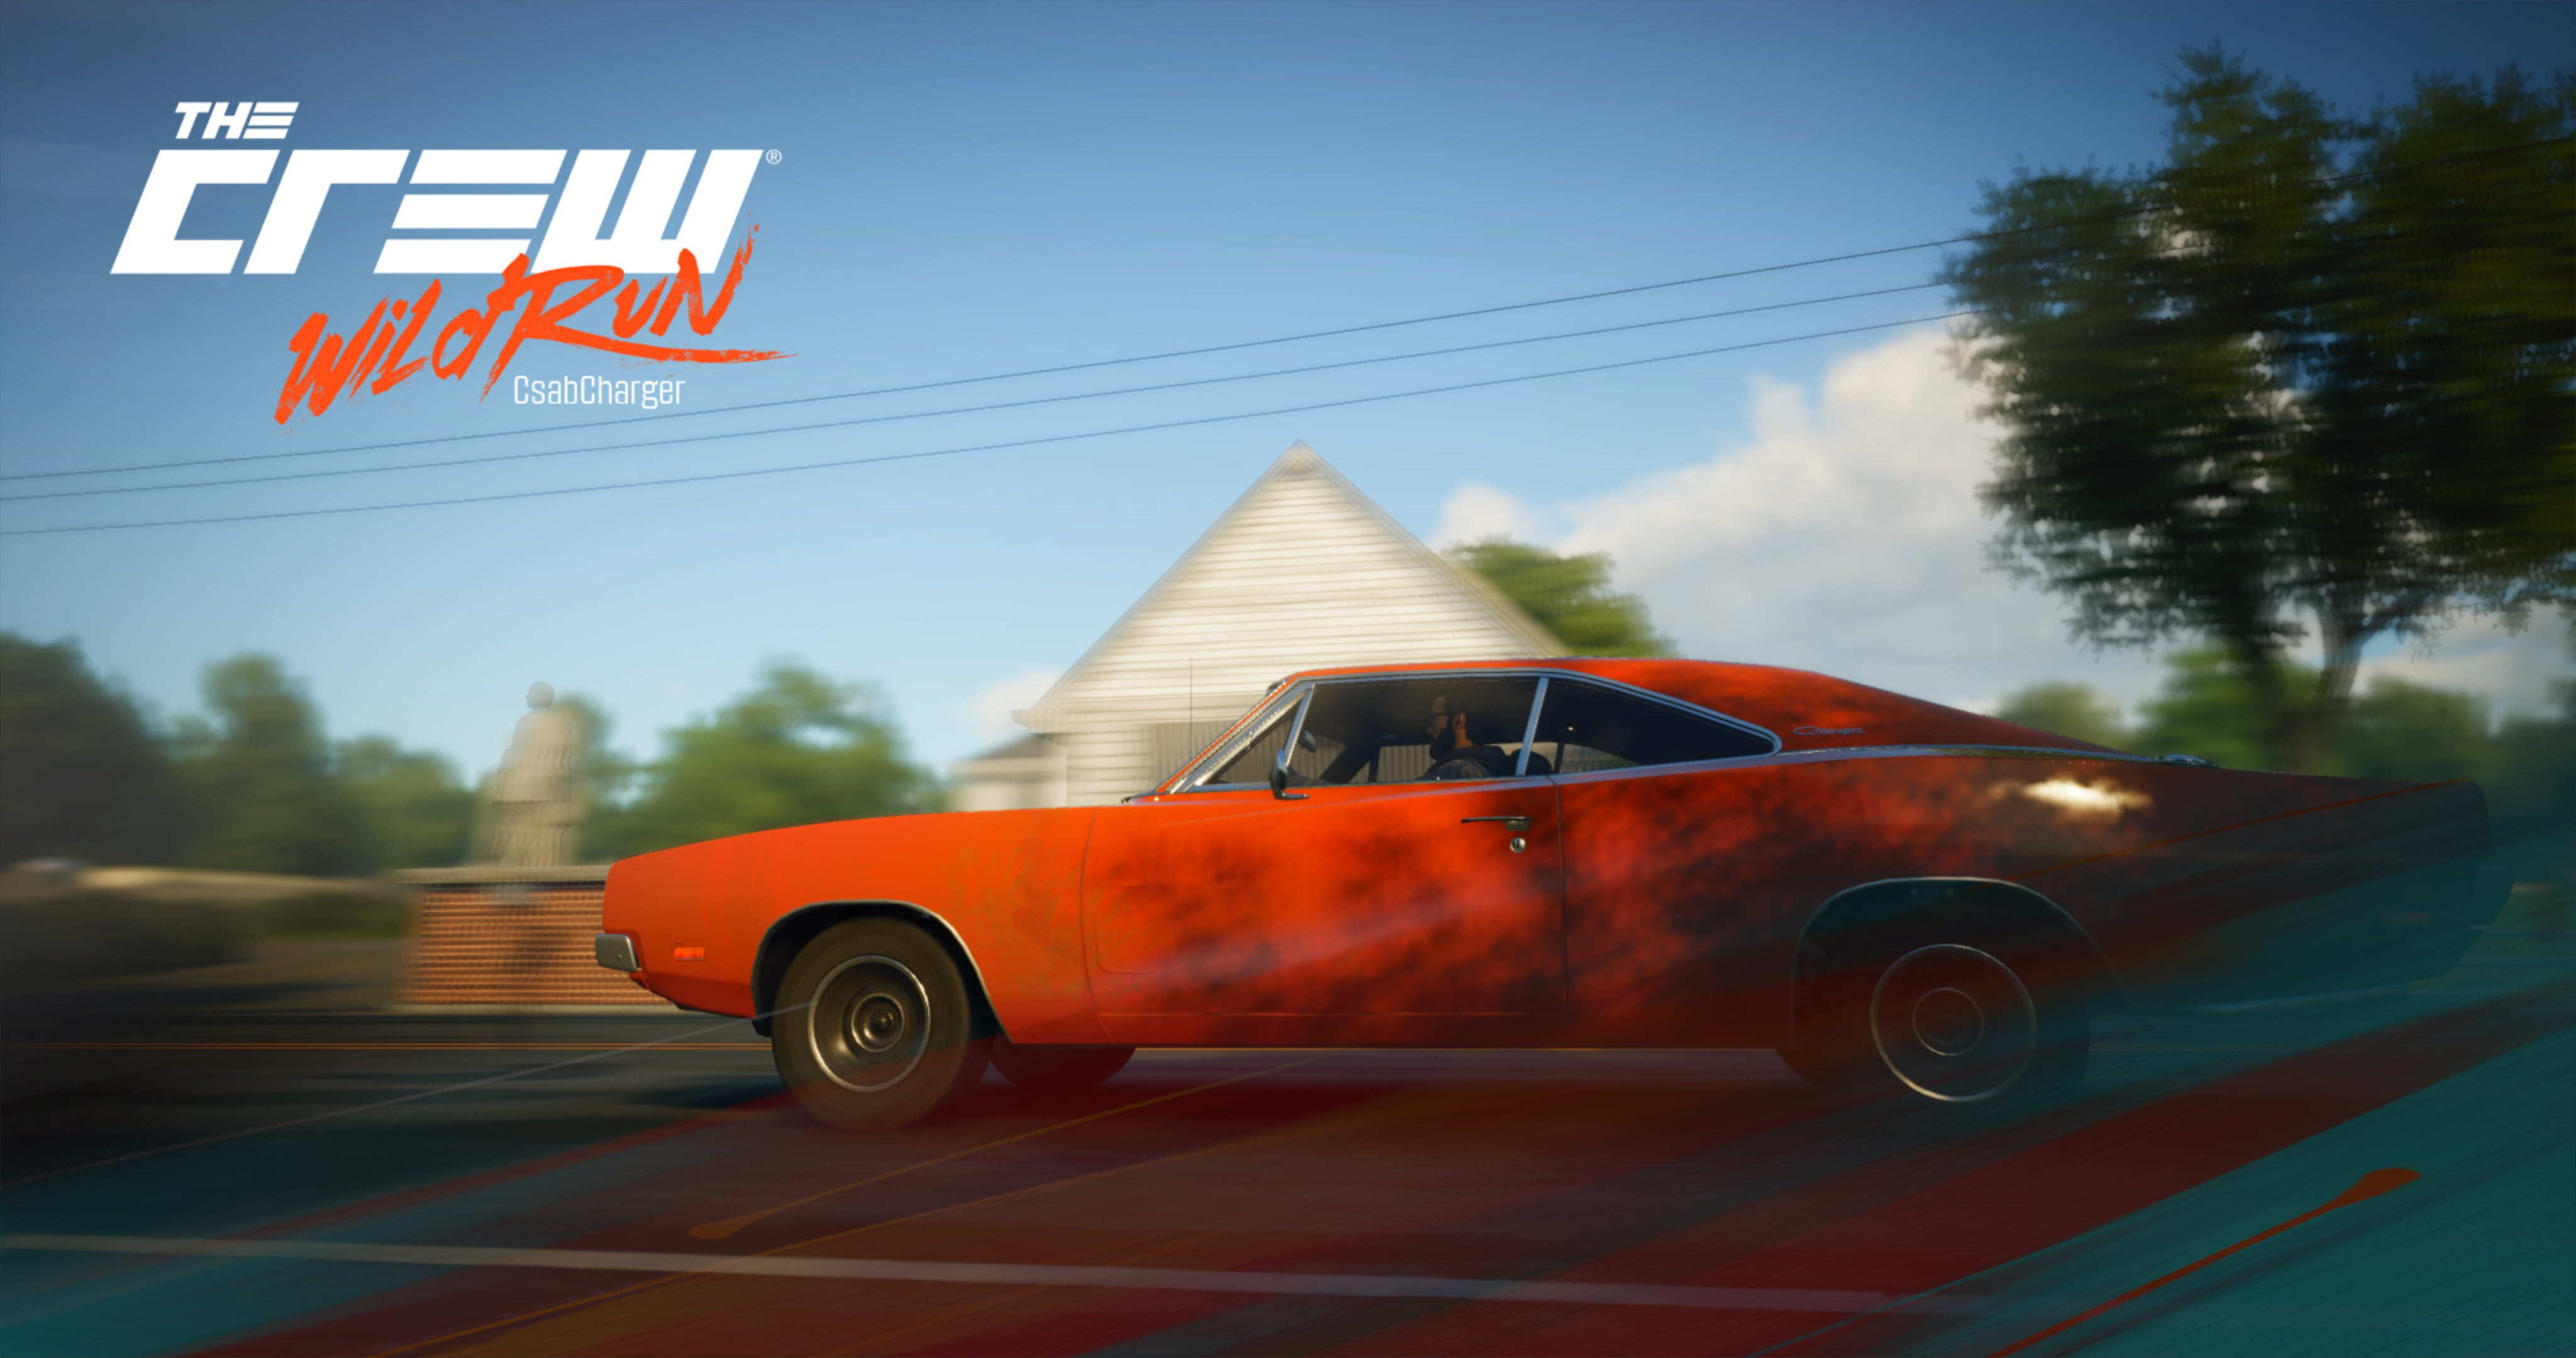 Dodge Charger R/T 1968, race cars, The Crew, The Crew Wild Run